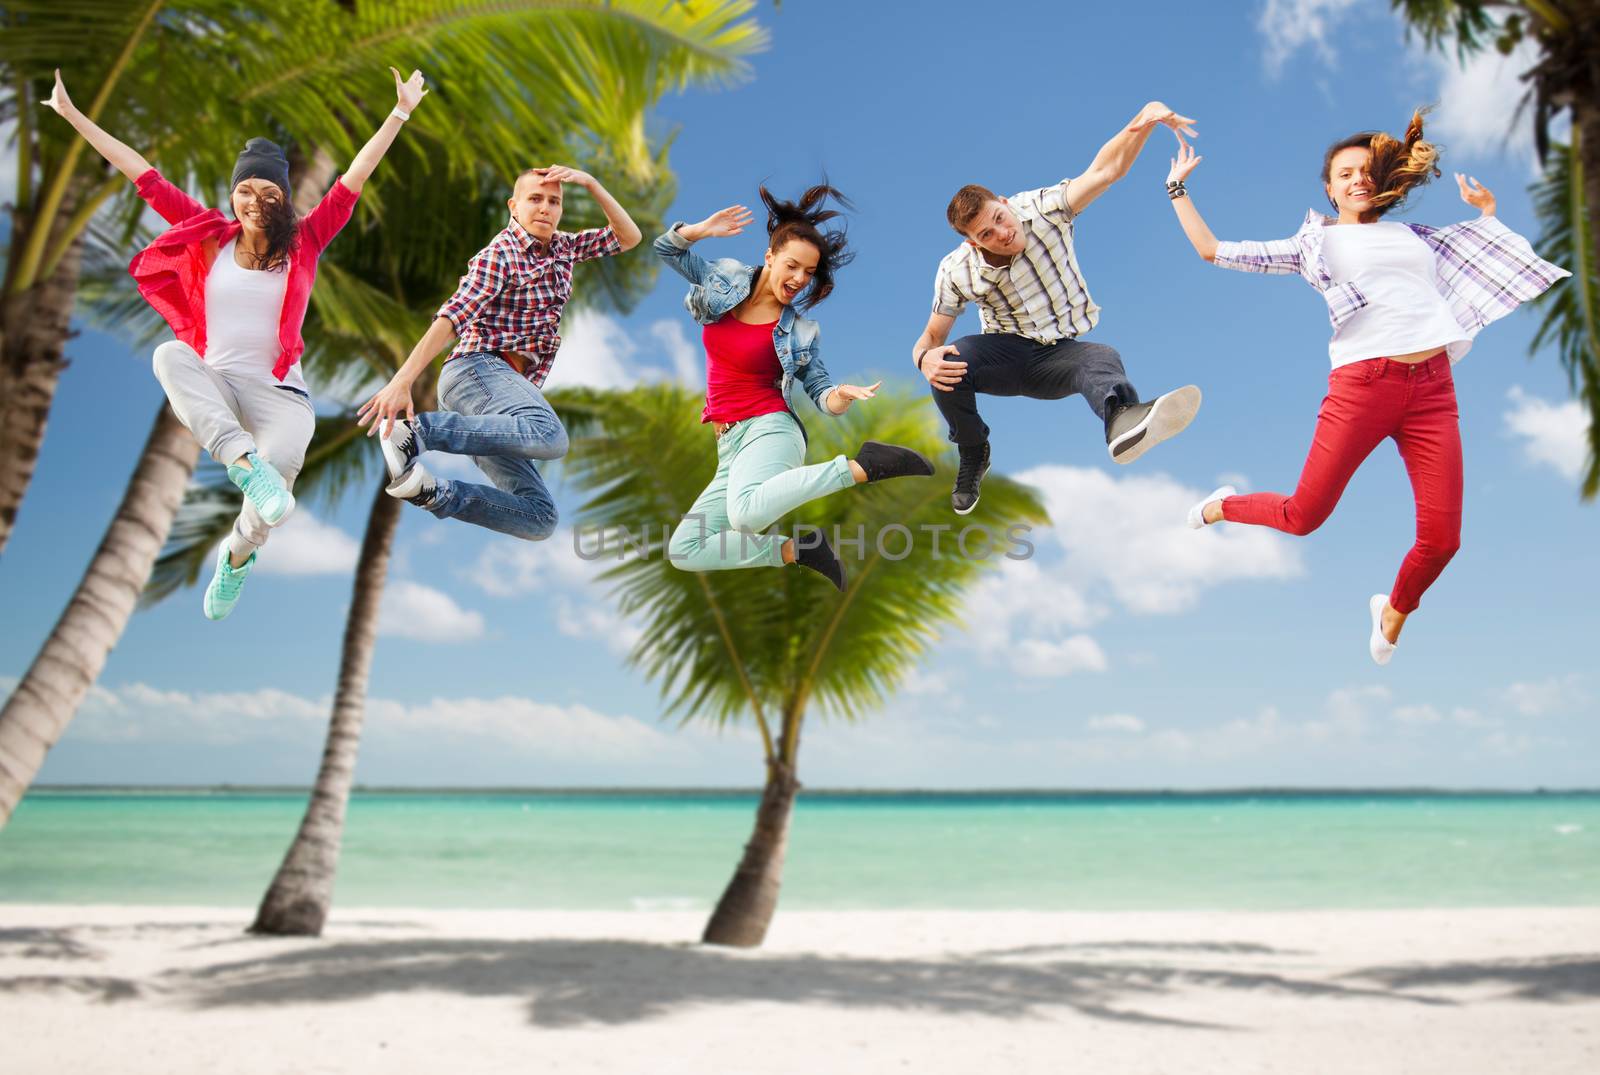 summer, sport, dancing, vacation and teenage lifestyle concept - group of teenagers jumping